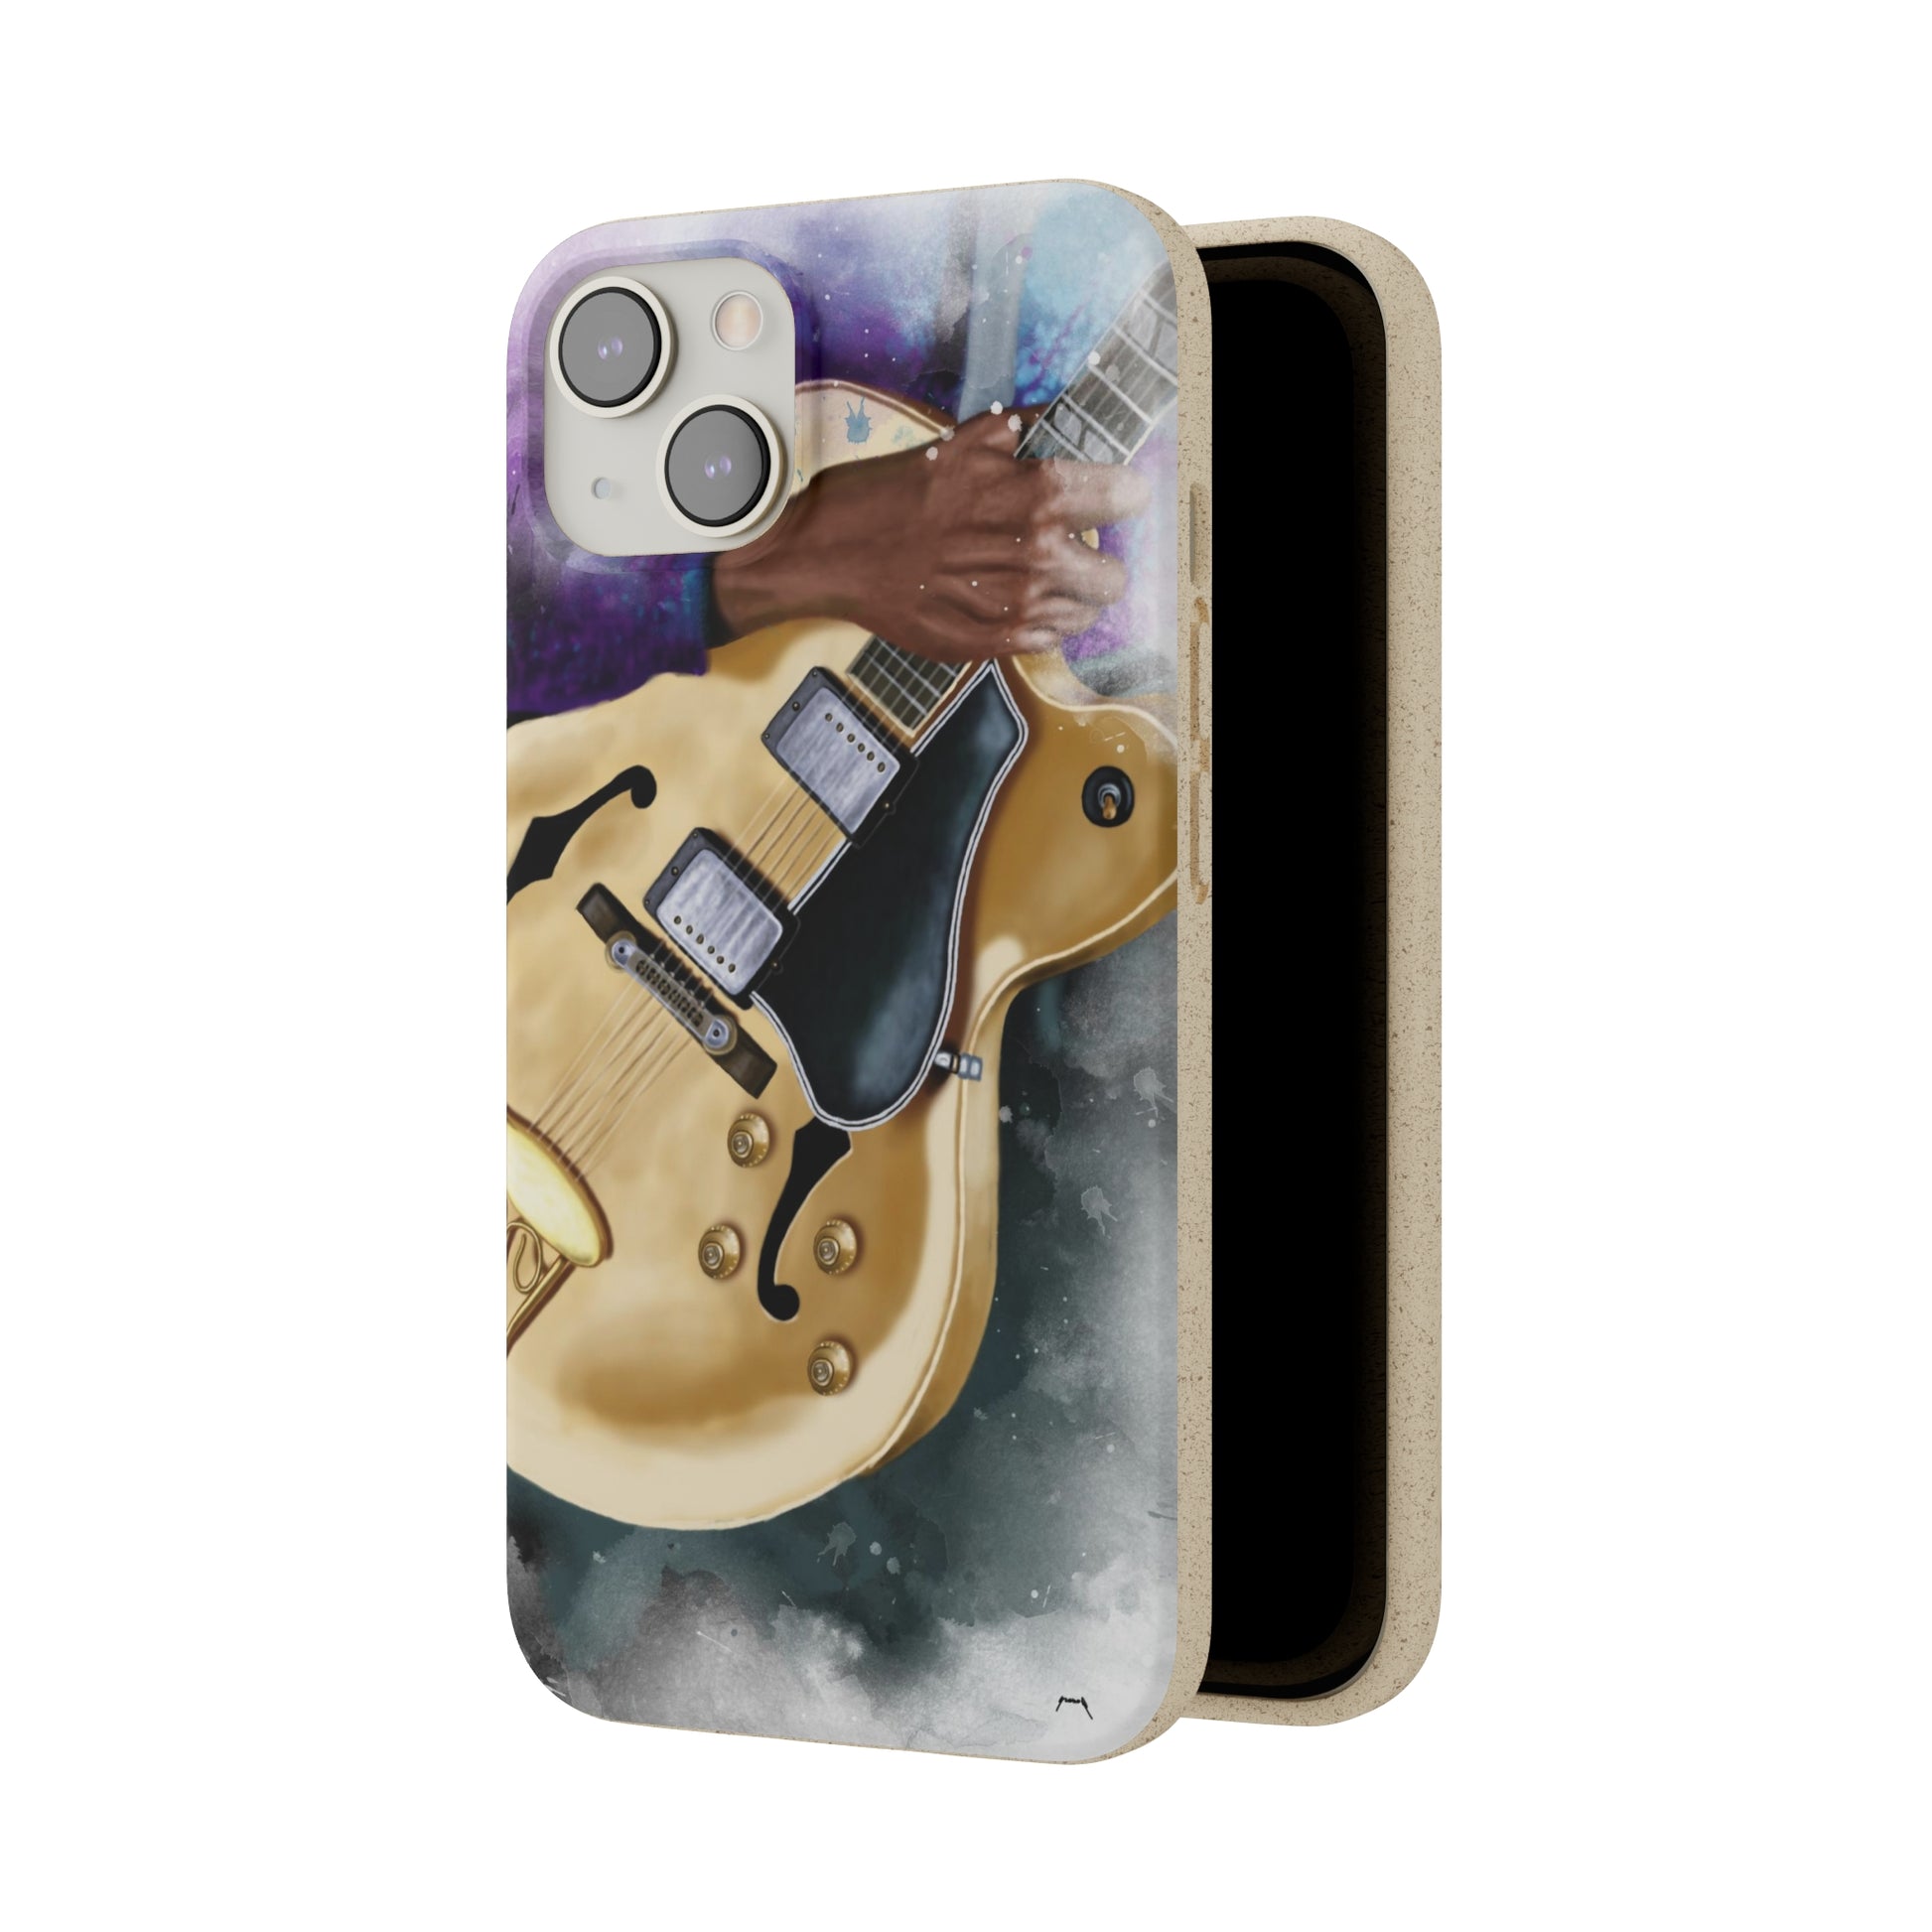 Digital painting of a vintage white hollowbody electric guitar with hand printed on a biodegradable iphone phone case